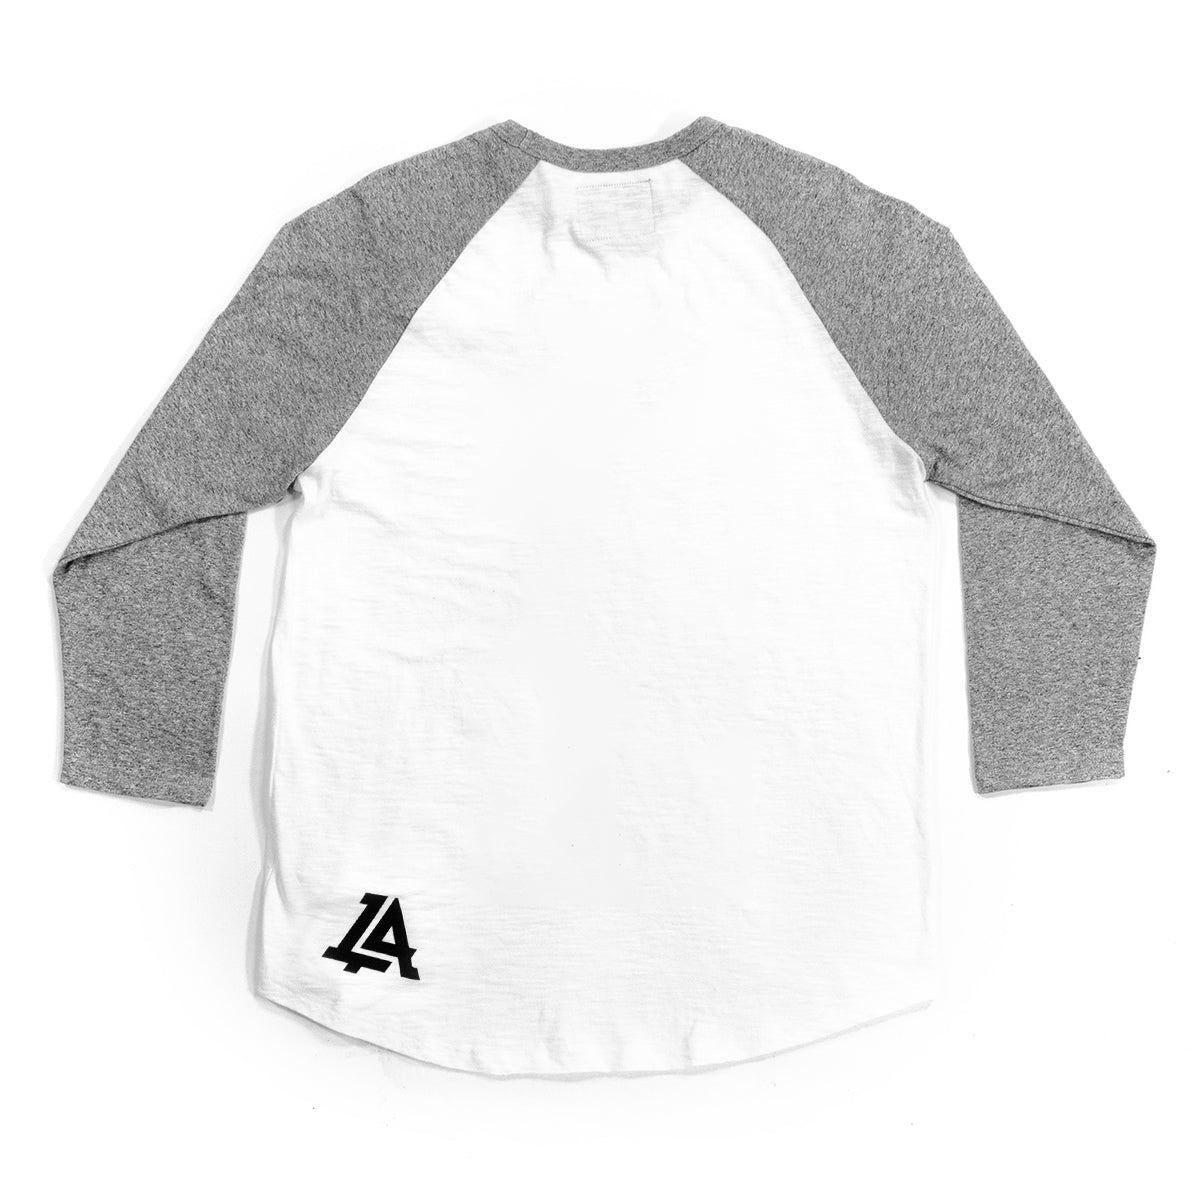 Lost Art Canada - white and grey blessed virgin mary baseball tee back view